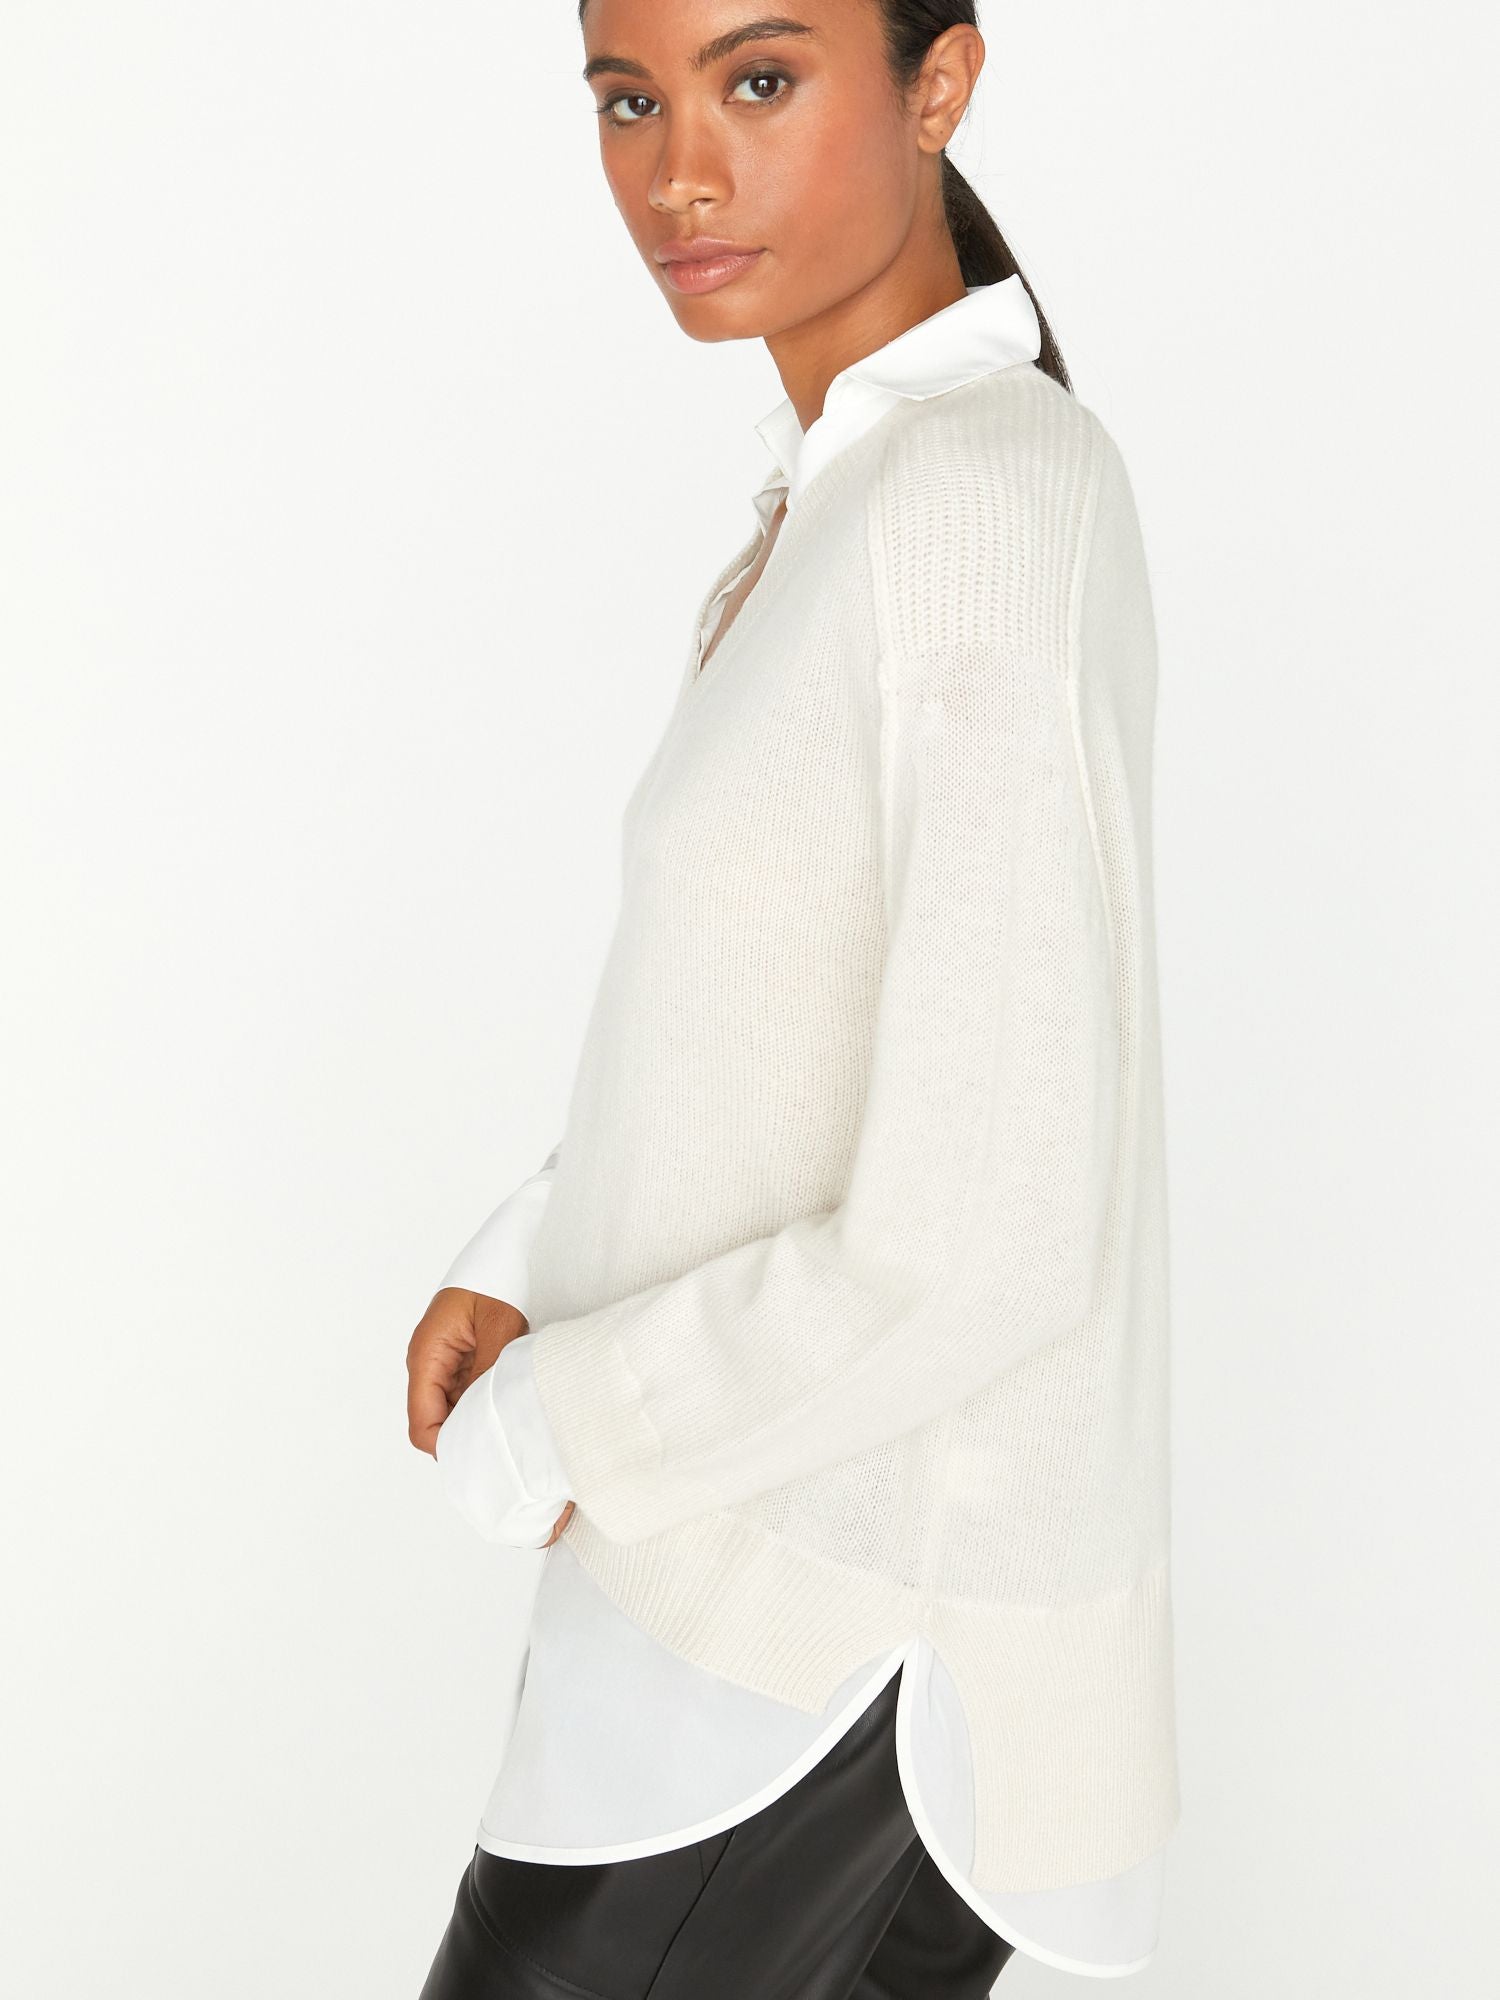 Looker ivory layered v-neck sweater side view